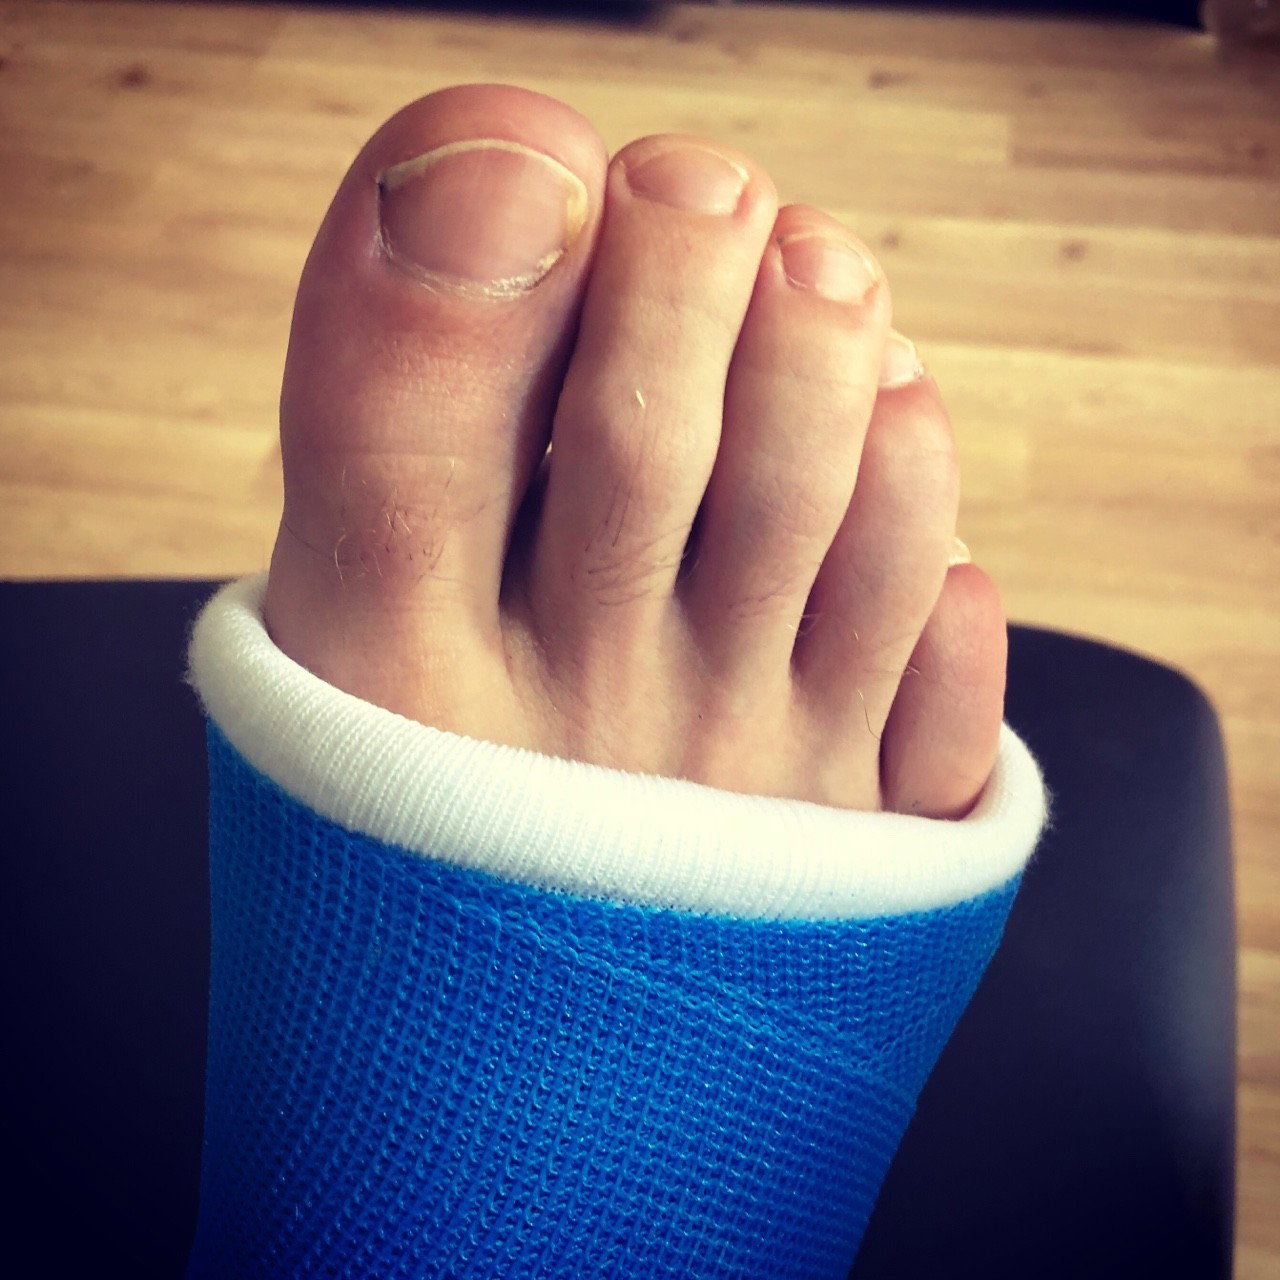 Watch the Photo by ampstef with the username @ampstef, posted on June 29, 2018 and the text says 'castmande:

Close up of my #toes in my #legcast #brokenleg #brokenfoot'